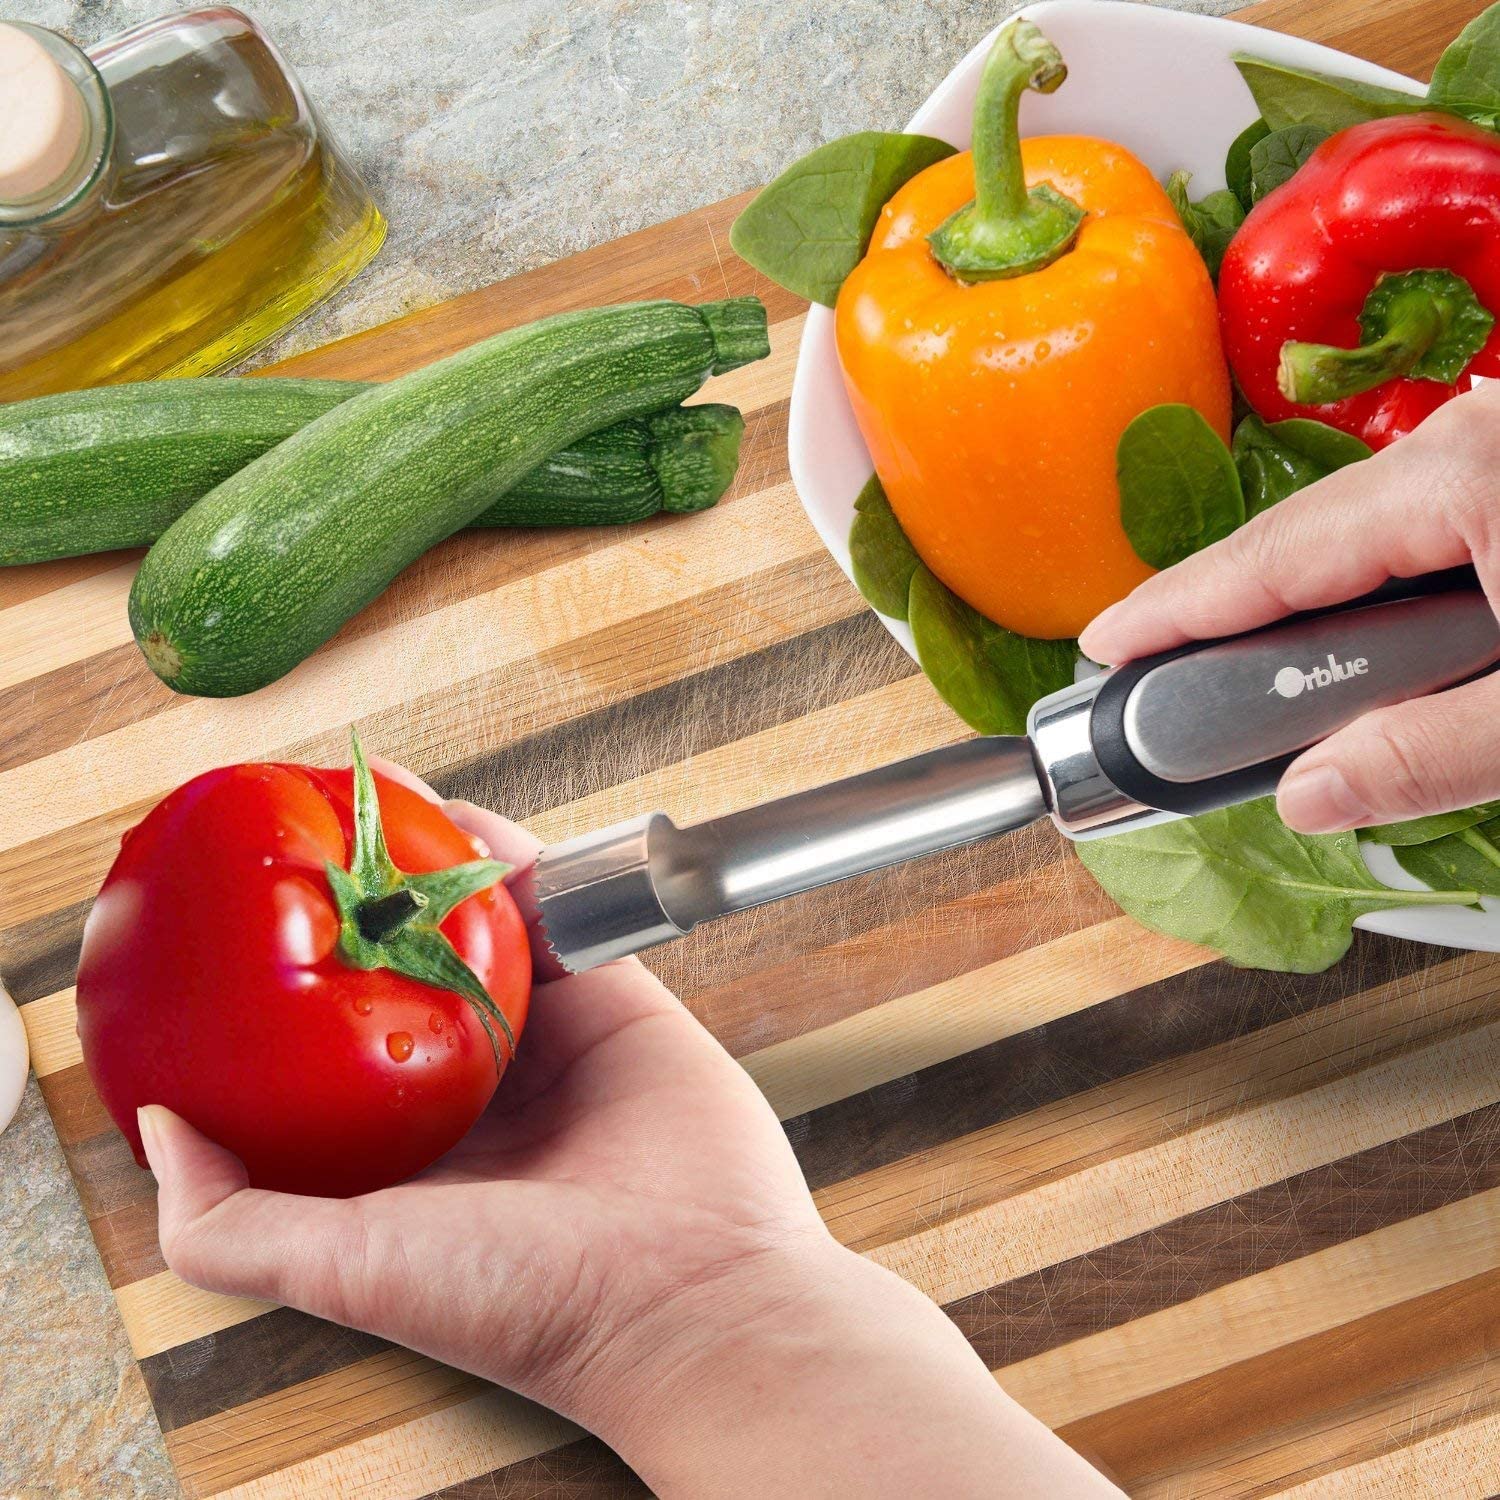 A pair of hands is using an apple corer to core a tomato. Zucchinis and capsicums are nearby on a wooden chopping board.